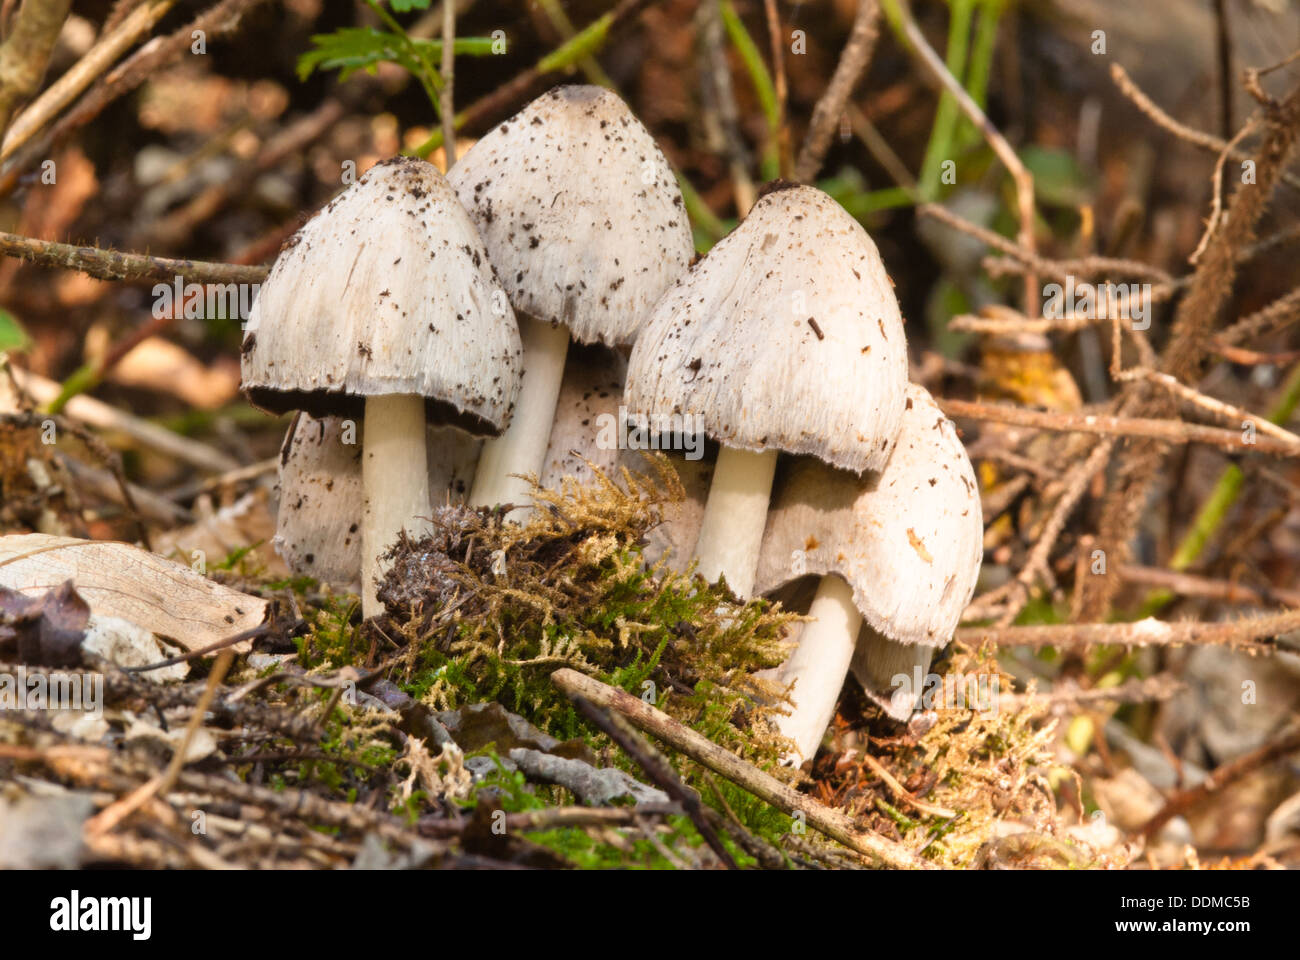 Smooth ink cap (Coprinus atramentarius) growing in a group on the forest floor, White Spruce Forest, St Albert, Alberta Stock Photo